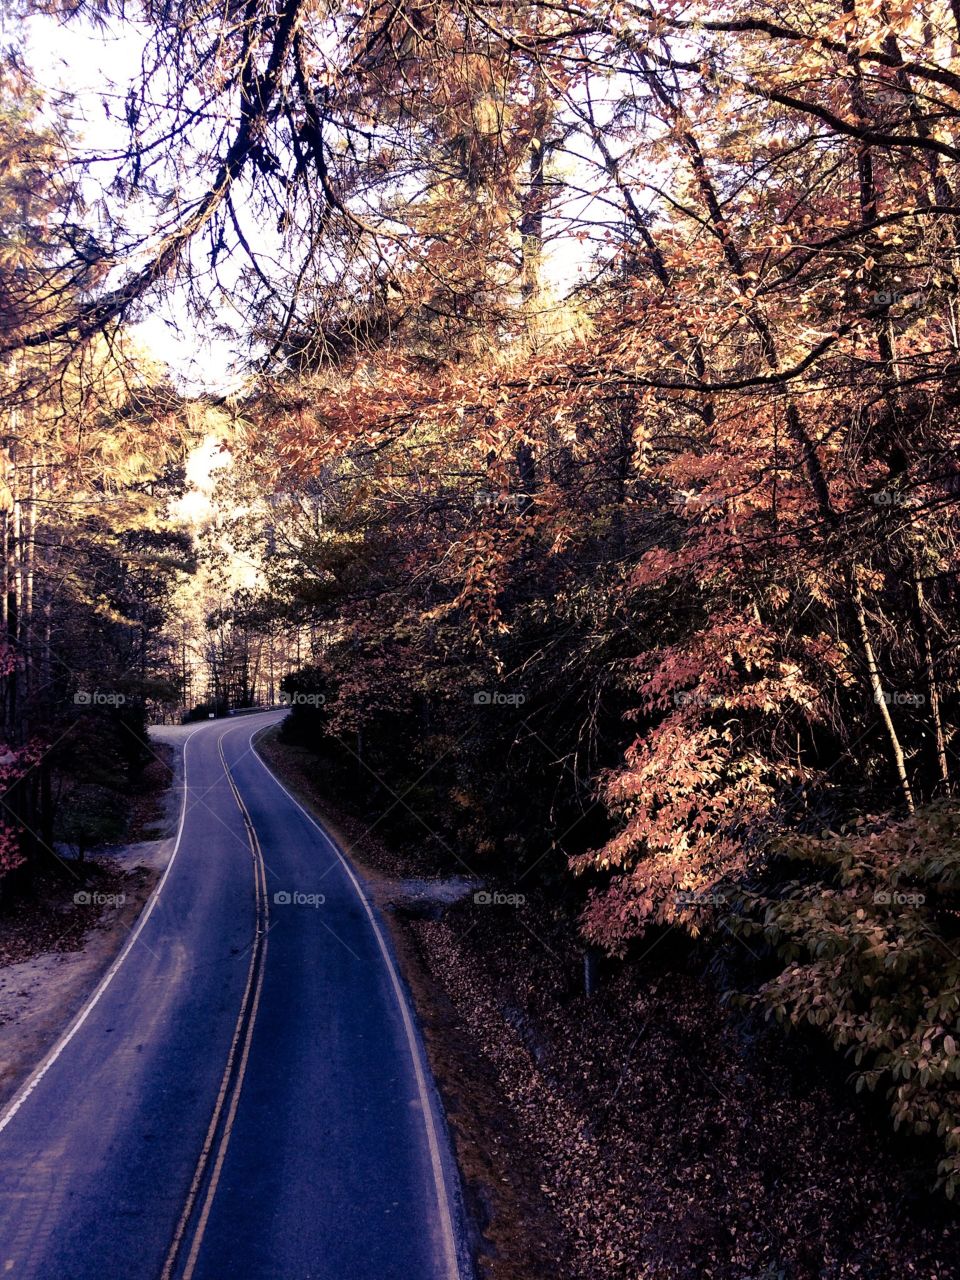 My number one favorite photo of all time is this one. It’s a backroad country mountain road with hills and turns and trees racing over the road. During the fall the leaves change to vivid reds, oranges, and yellows. It’s almost a vintage beauty. 